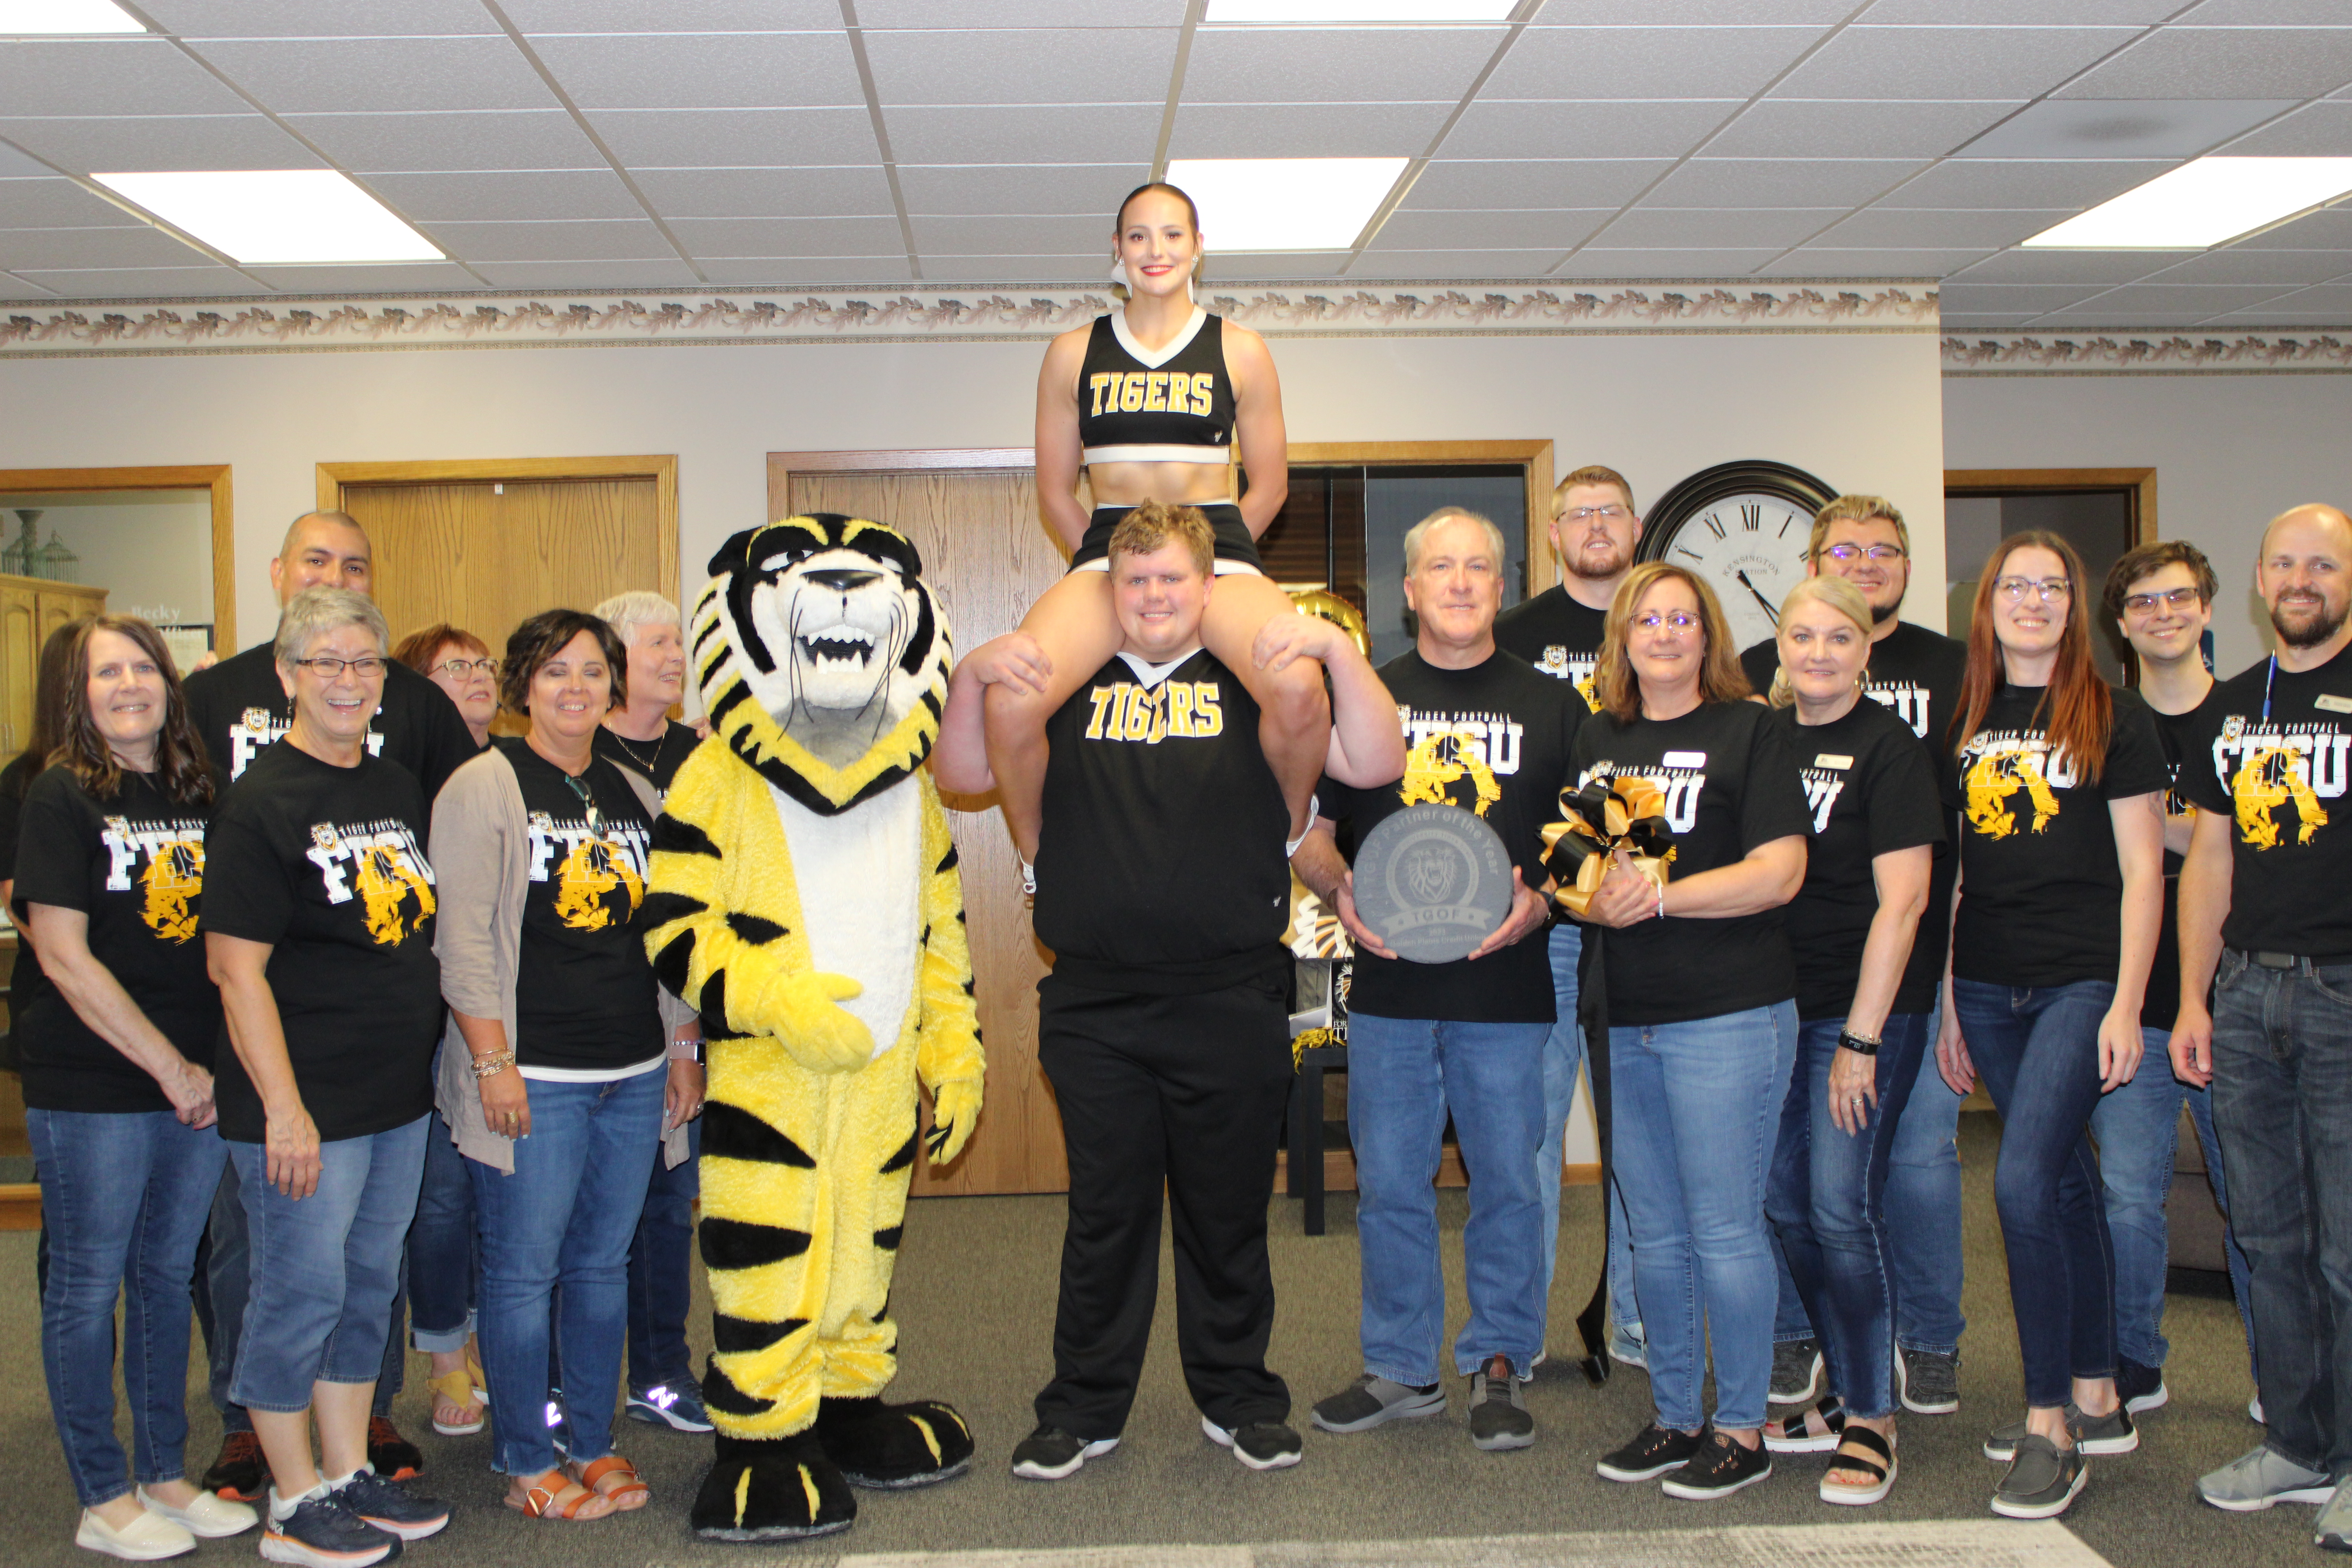 Victor E. Tiger and FHSU cheerleaders celebrate with TGOF Partner of the Year, Golden Plains Credit Union